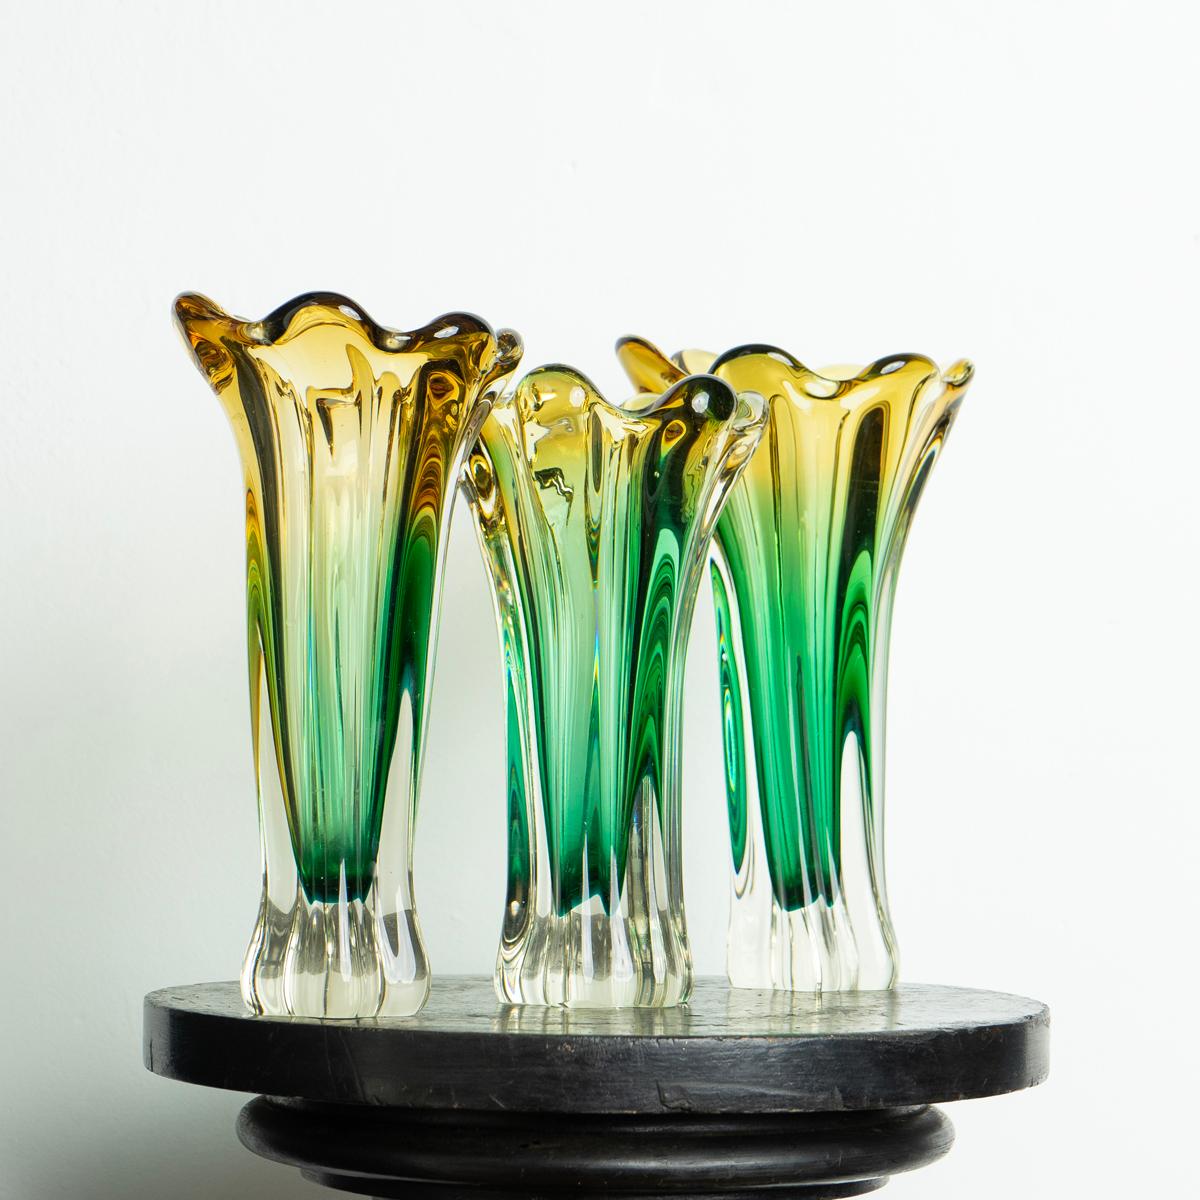 Mid-century hand-blown glass vase collection
A collection of three graduated vases of twisted naturalistic forms in green, yellow and clear glass.

Dating from the 1960s-1970s period.

They are all in very good vintage condition with only minor